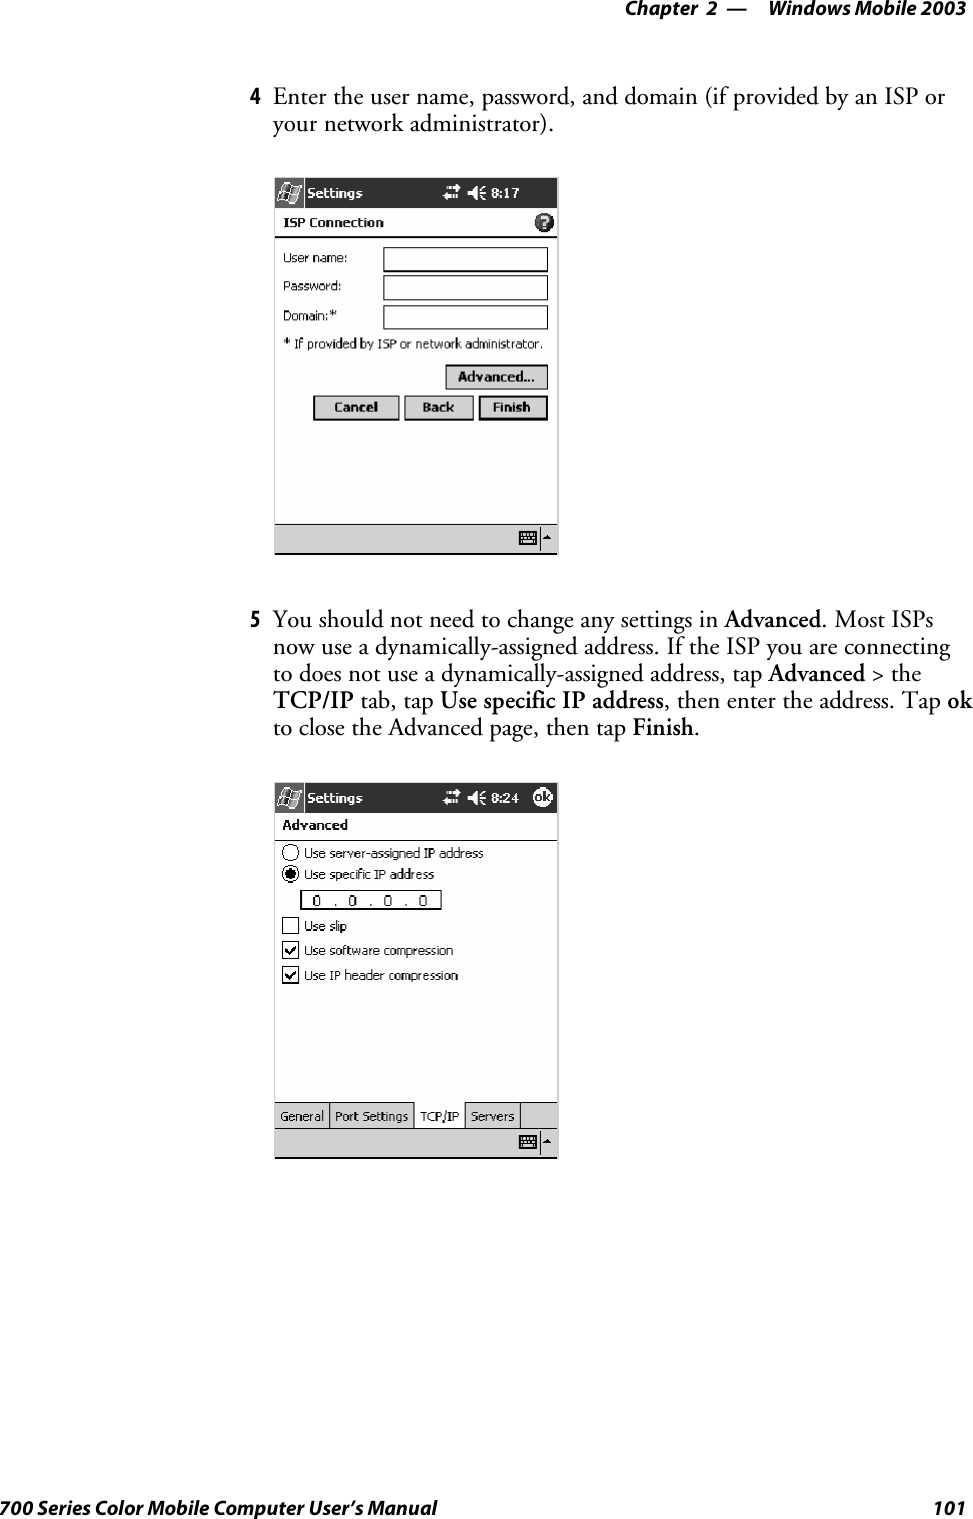 Windows Mobile 2003—Chapter 2101700 Series Color Mobile Computer User’s Manual4Enter the user name, password, and domain (if provided by an ISP oryour network administrator).5You should not need to change any settings in Advanced.MostISPsnow use a dynamically-assigned address. If the ISP you are connectingto does not use a dynamically-assigned address, tap Advanced &gt;theTCP/IP tab, tap Use specific IP address, then enter the address. Tap okto close the Advanced page, then tap Finish.